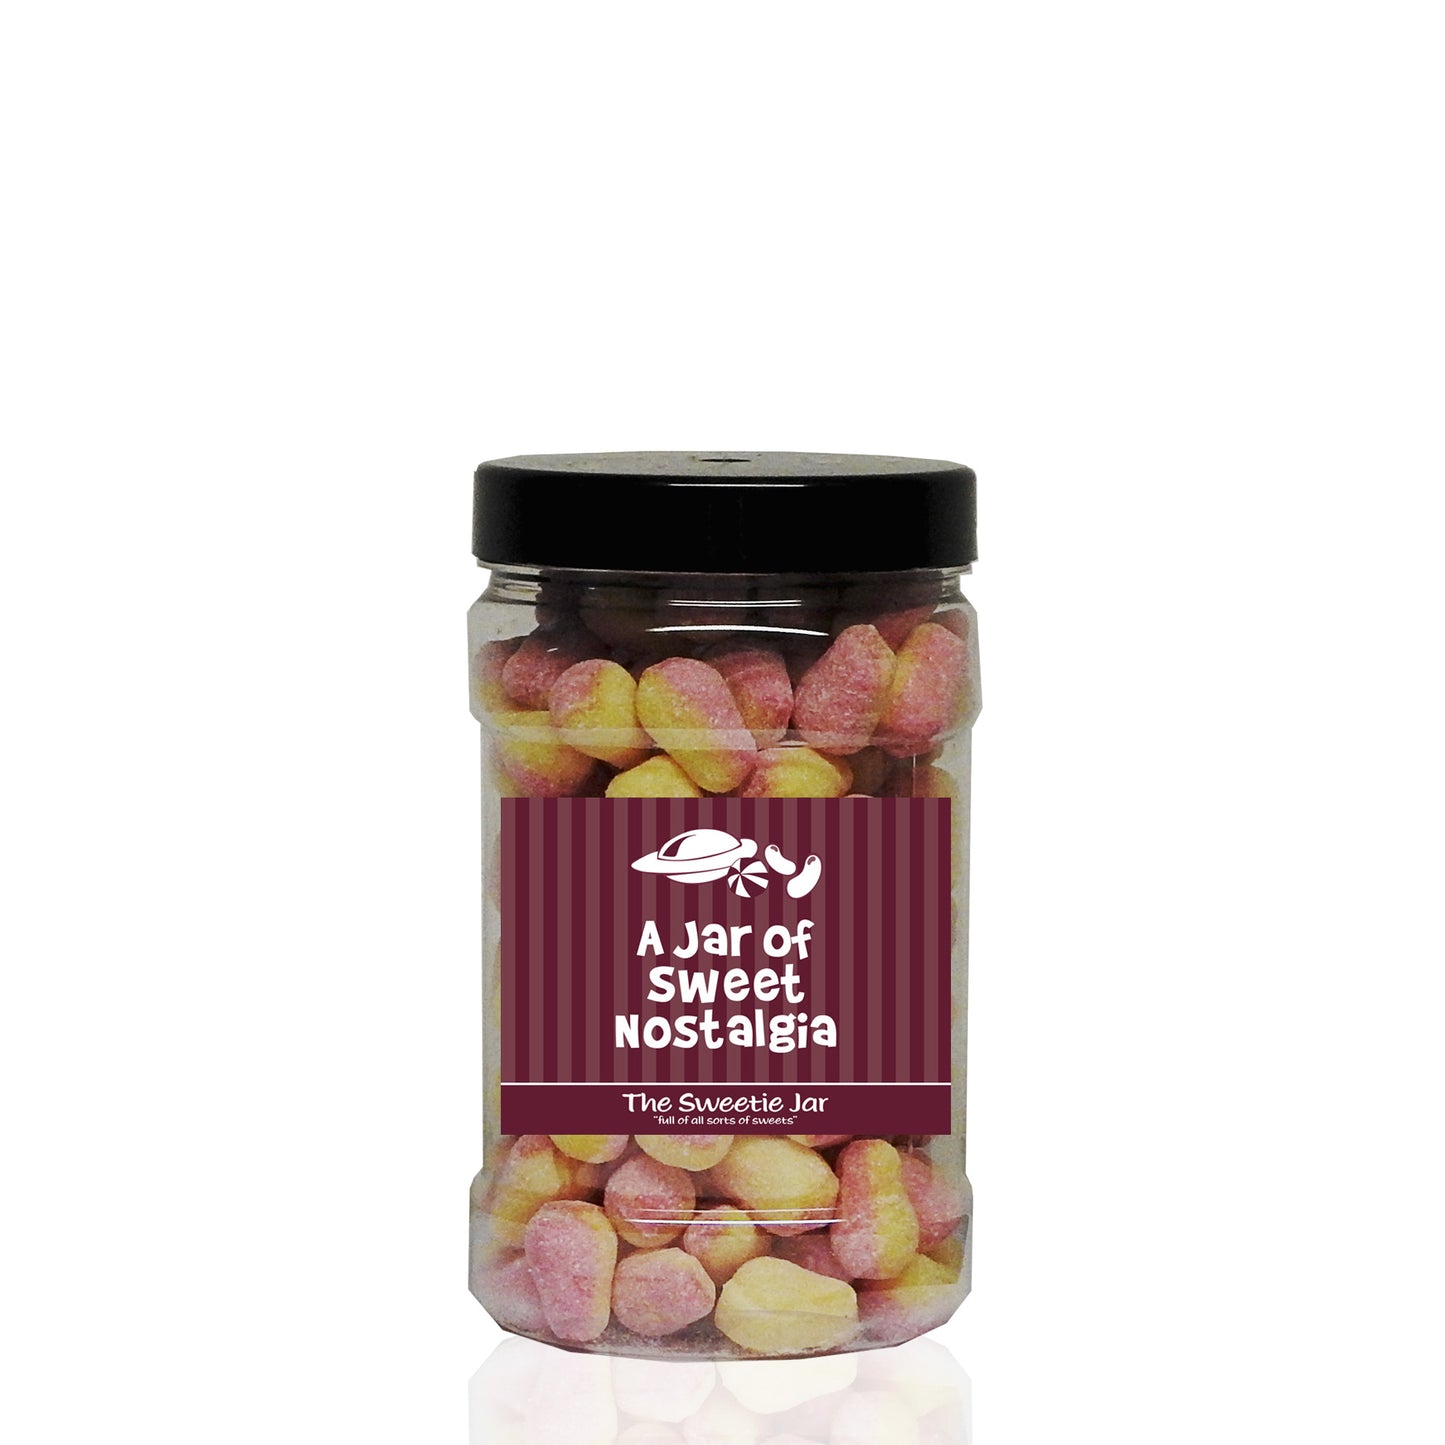 A Small Jar of Pear Drops - Jars of Retro Sweets at The Sweetie Jar